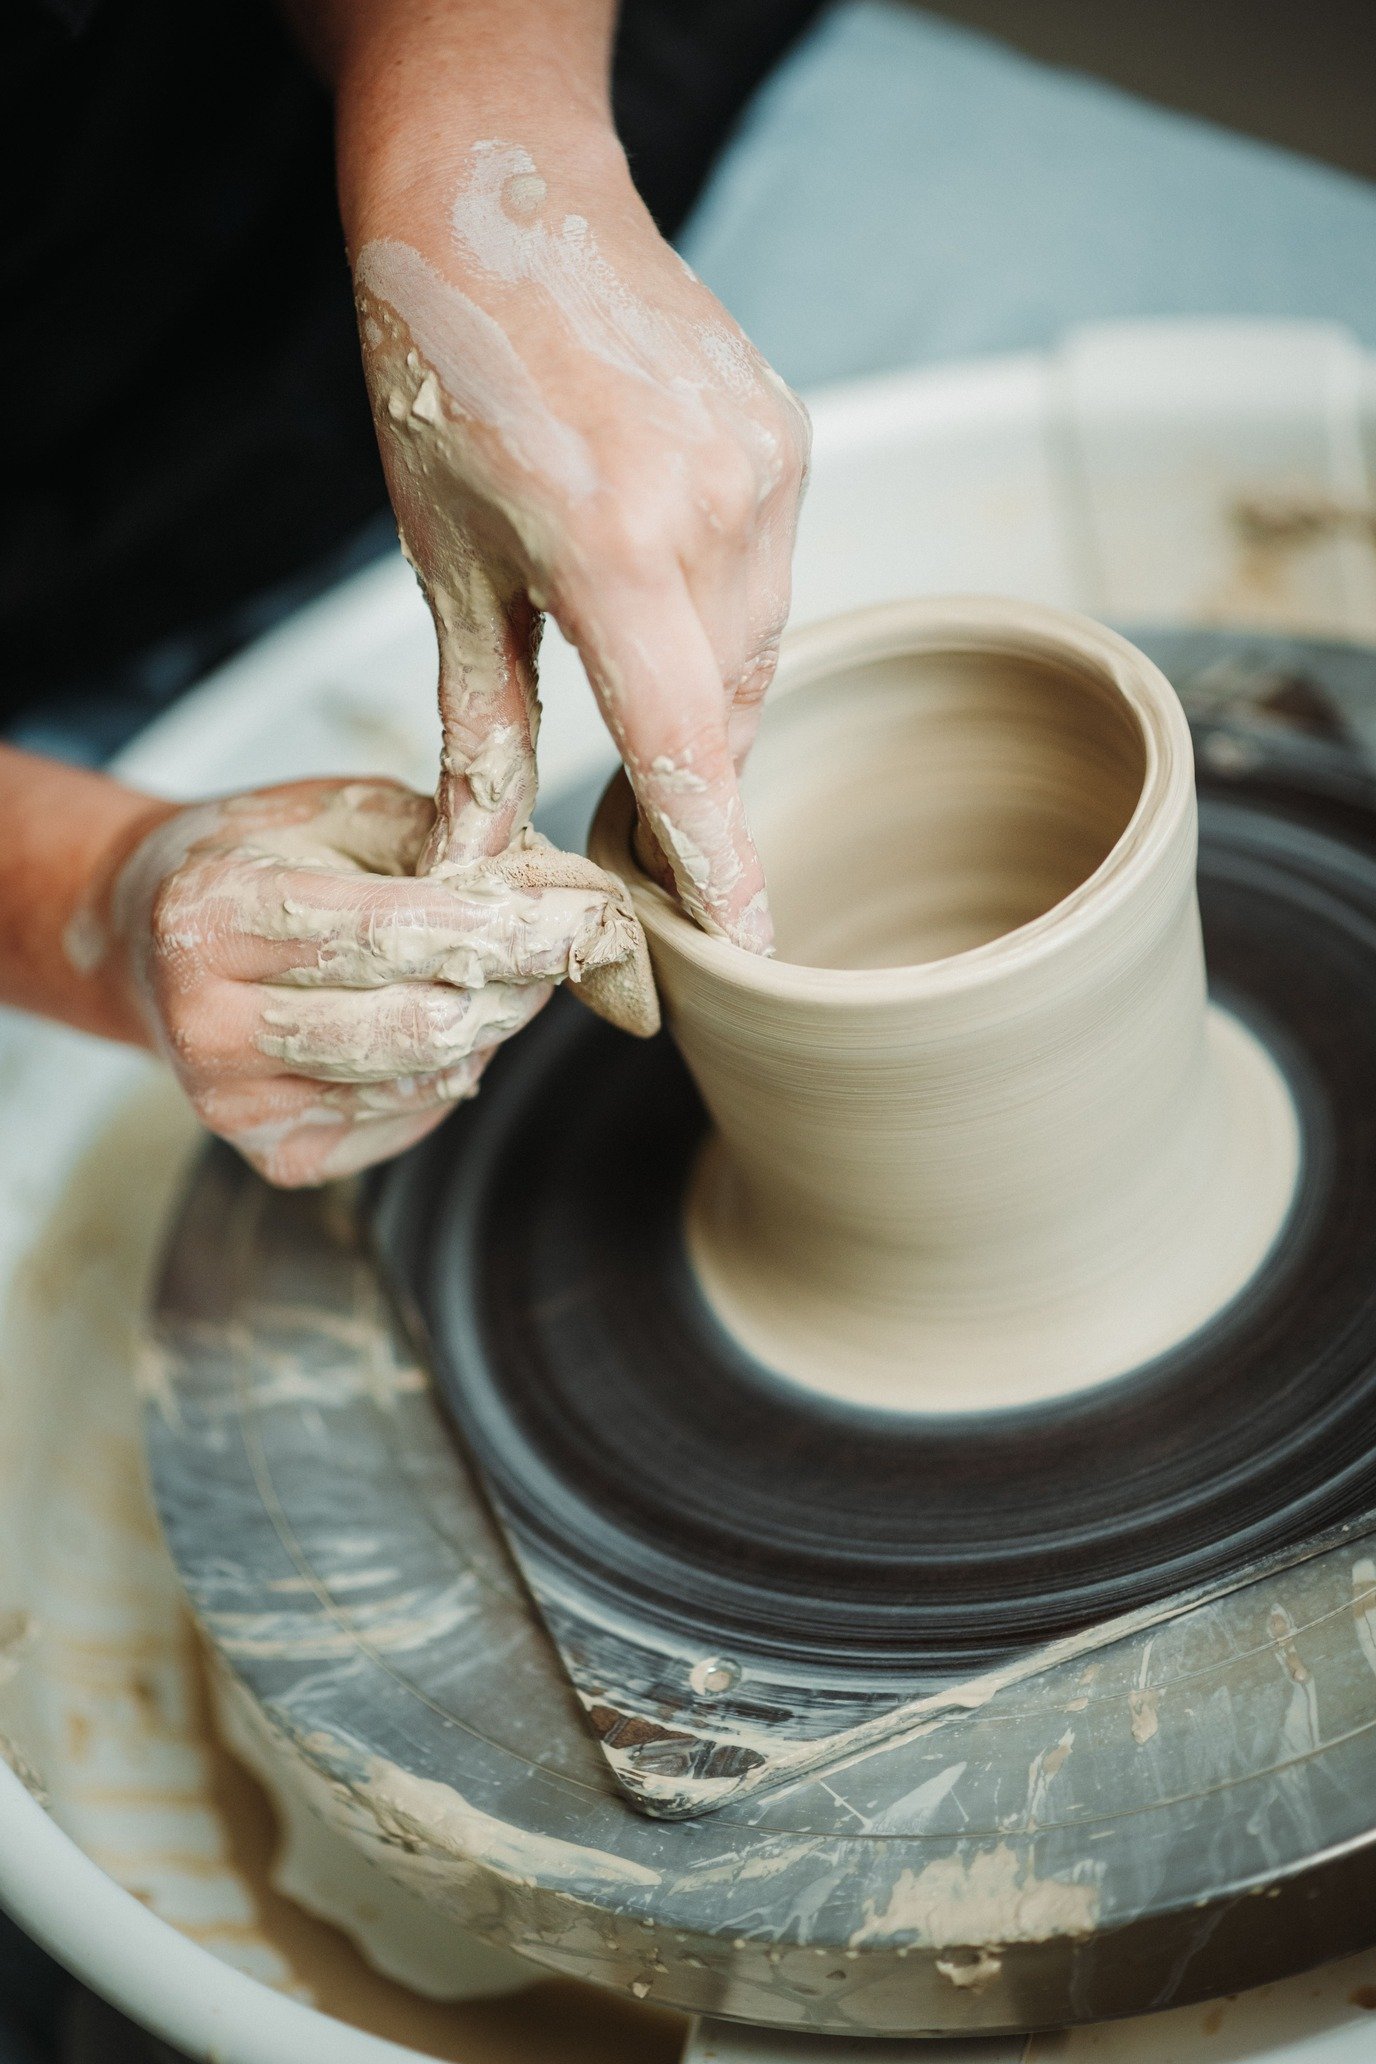 The Latest Fad in the Hamptons: Pottery Wheels - The New York Times